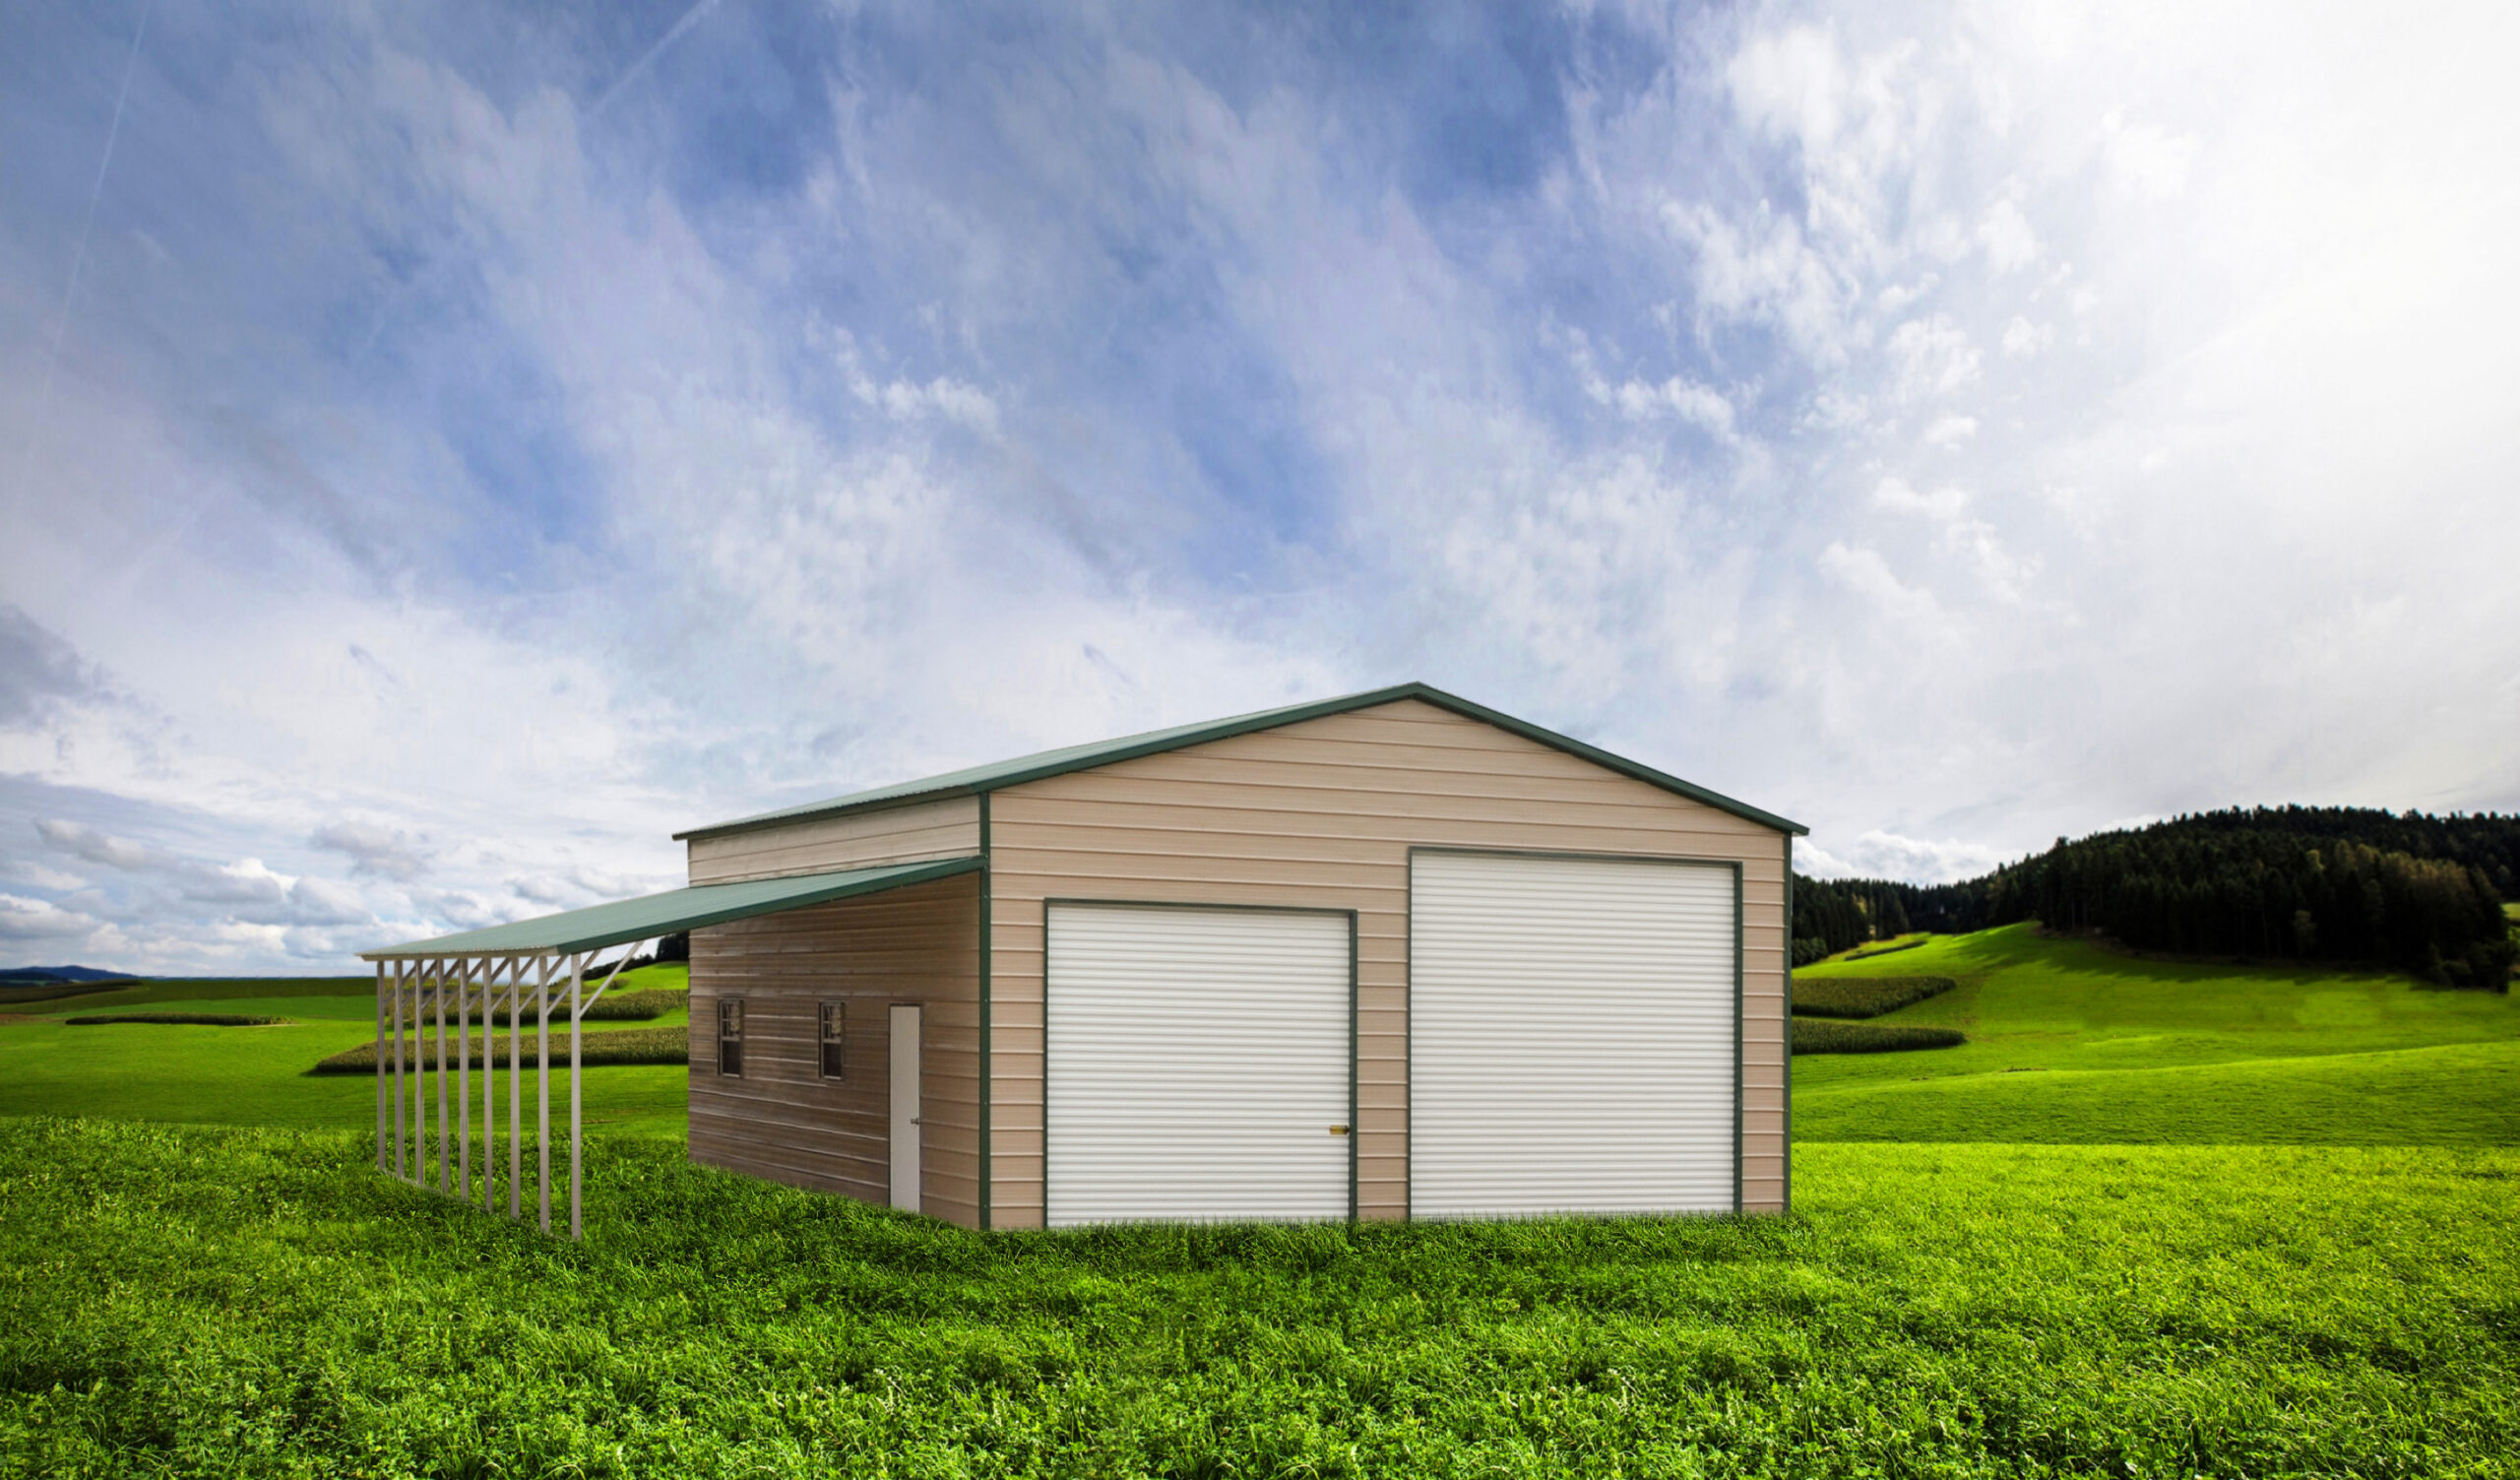 Garages vs. Carports: Which Should You Get?